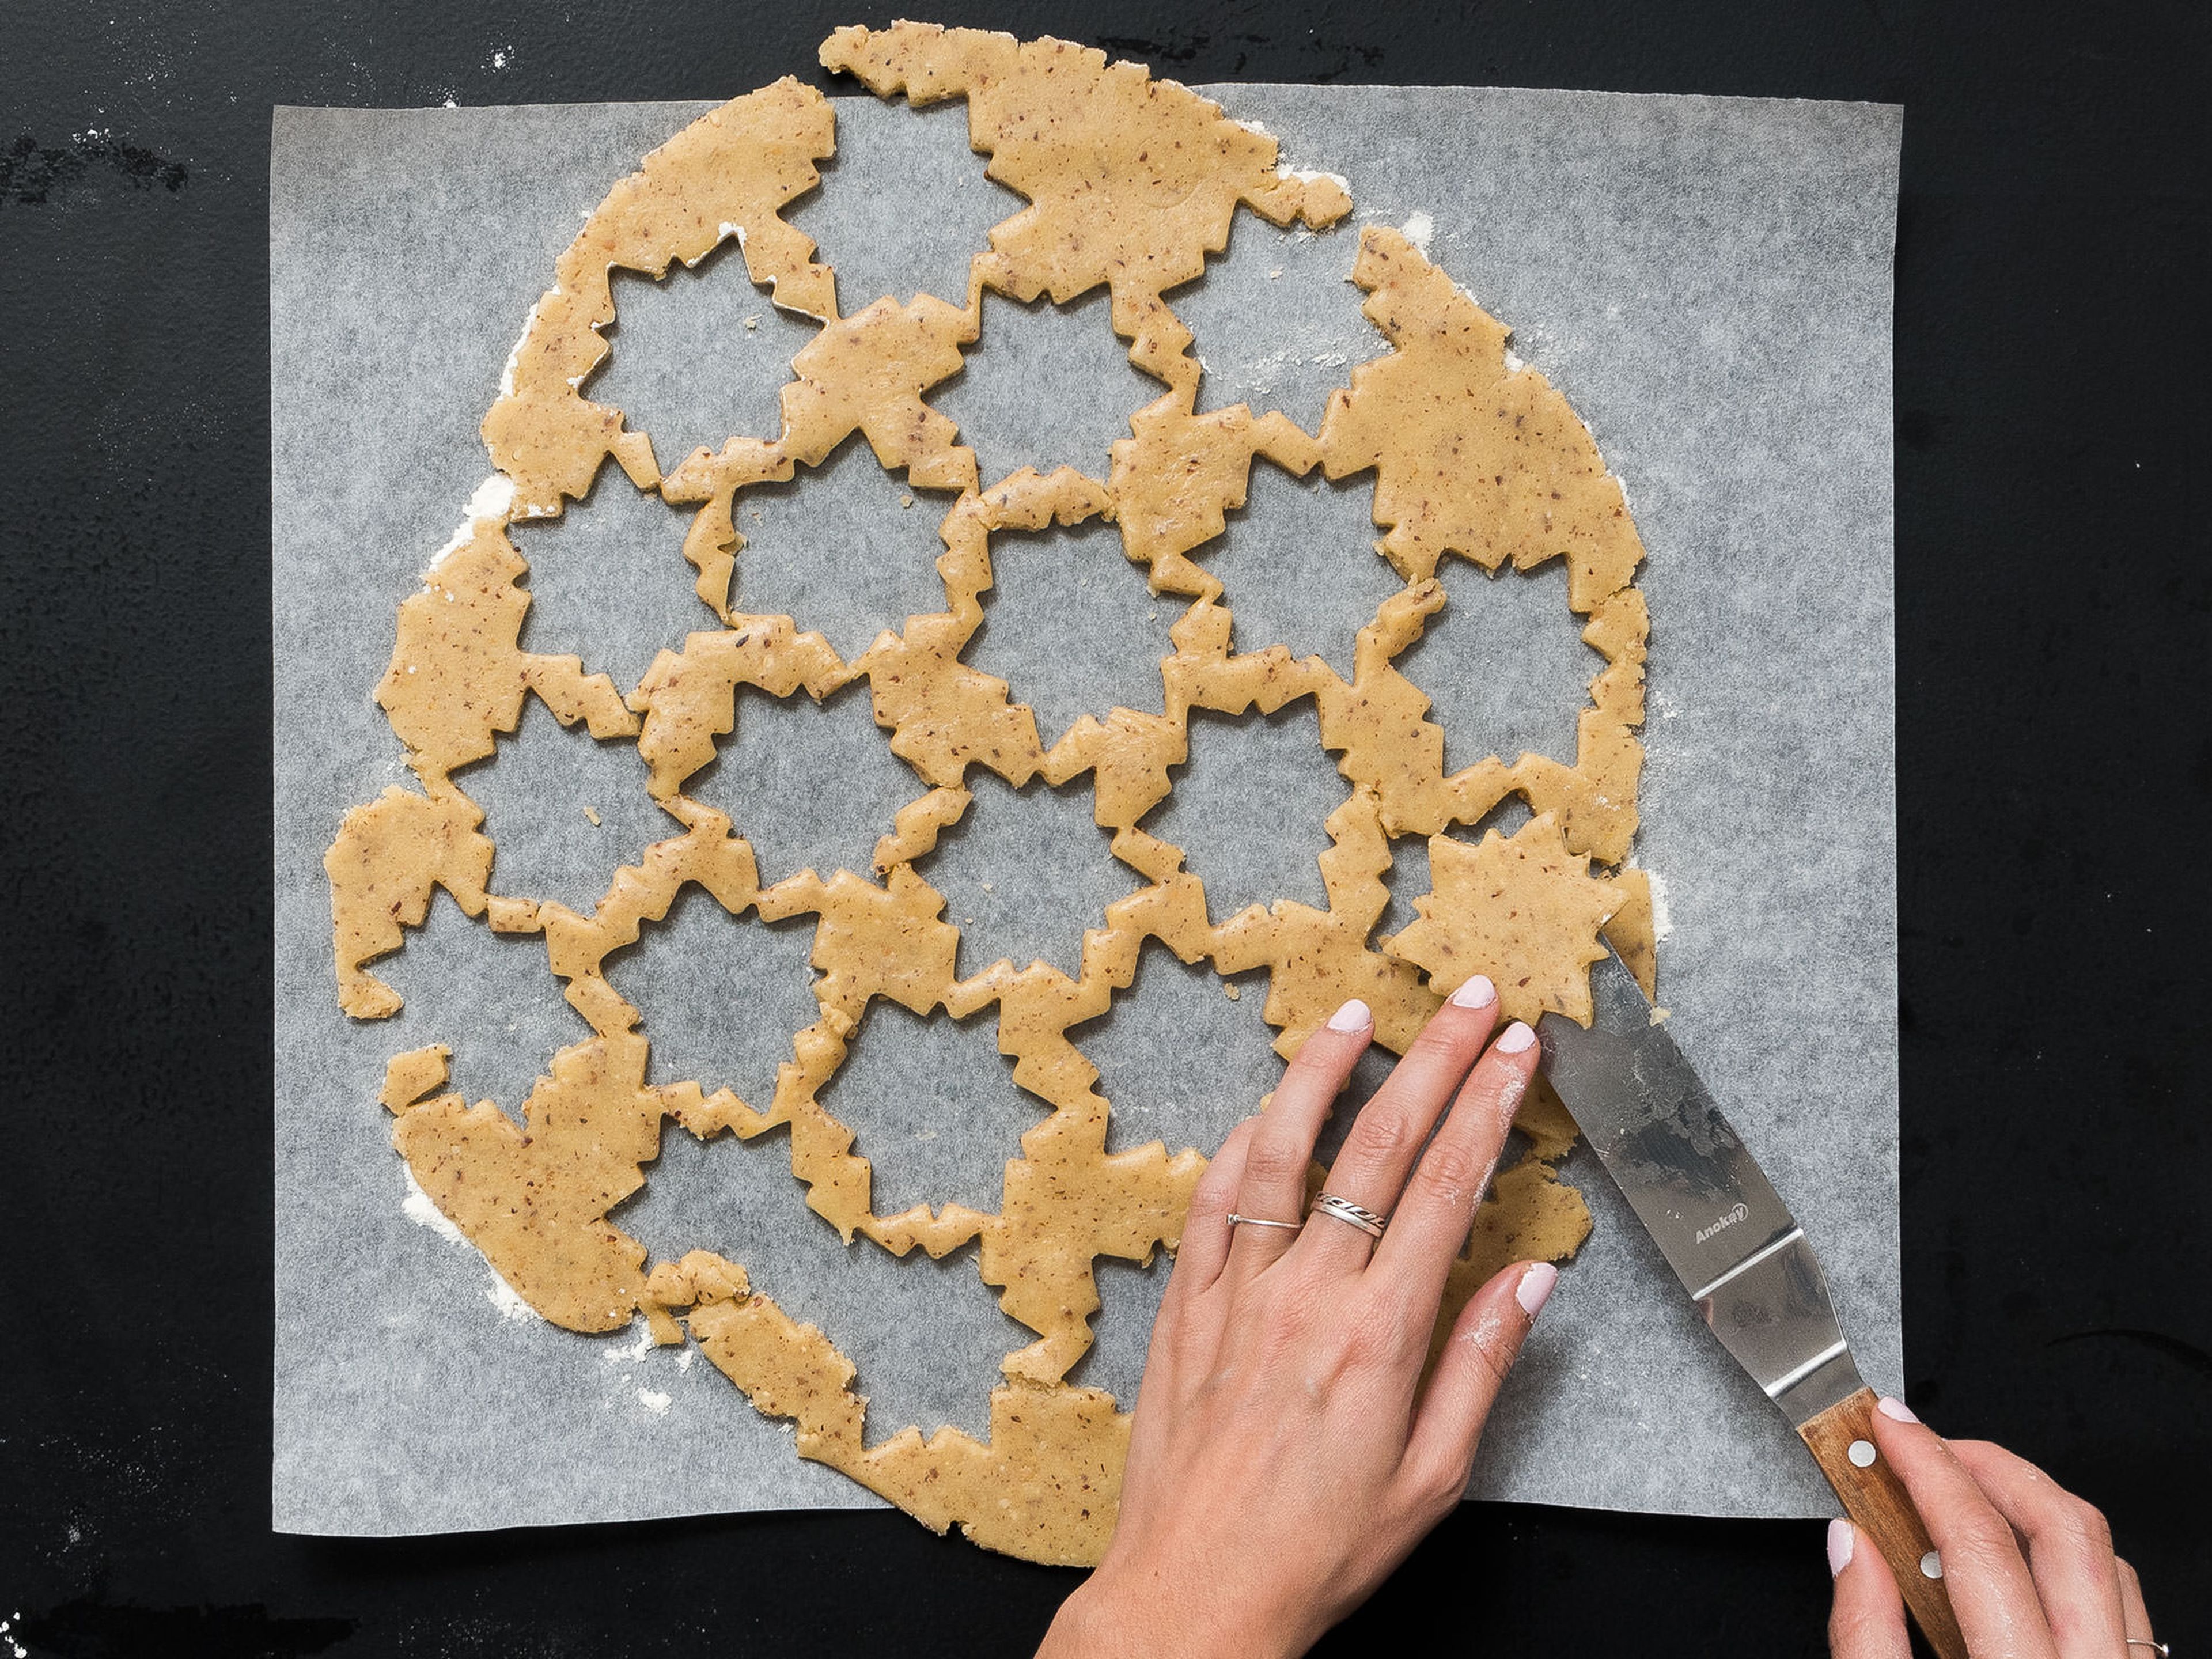 Pre-heat oven to 180°C/350°F. Flour working surface and roll out dough until approx. 2-mm/0.1-inch thick. Use a cookie cutter to cut out cookies and place the cookies onto a parchment-lined baking sheet. Use a small round cookie cutter to cut a hole out of the center of half of the cookies. Transfer to oven and bake at 180°C/350°F for approx. 15 min., or until golden brown. Remove from oven and leave to cool.